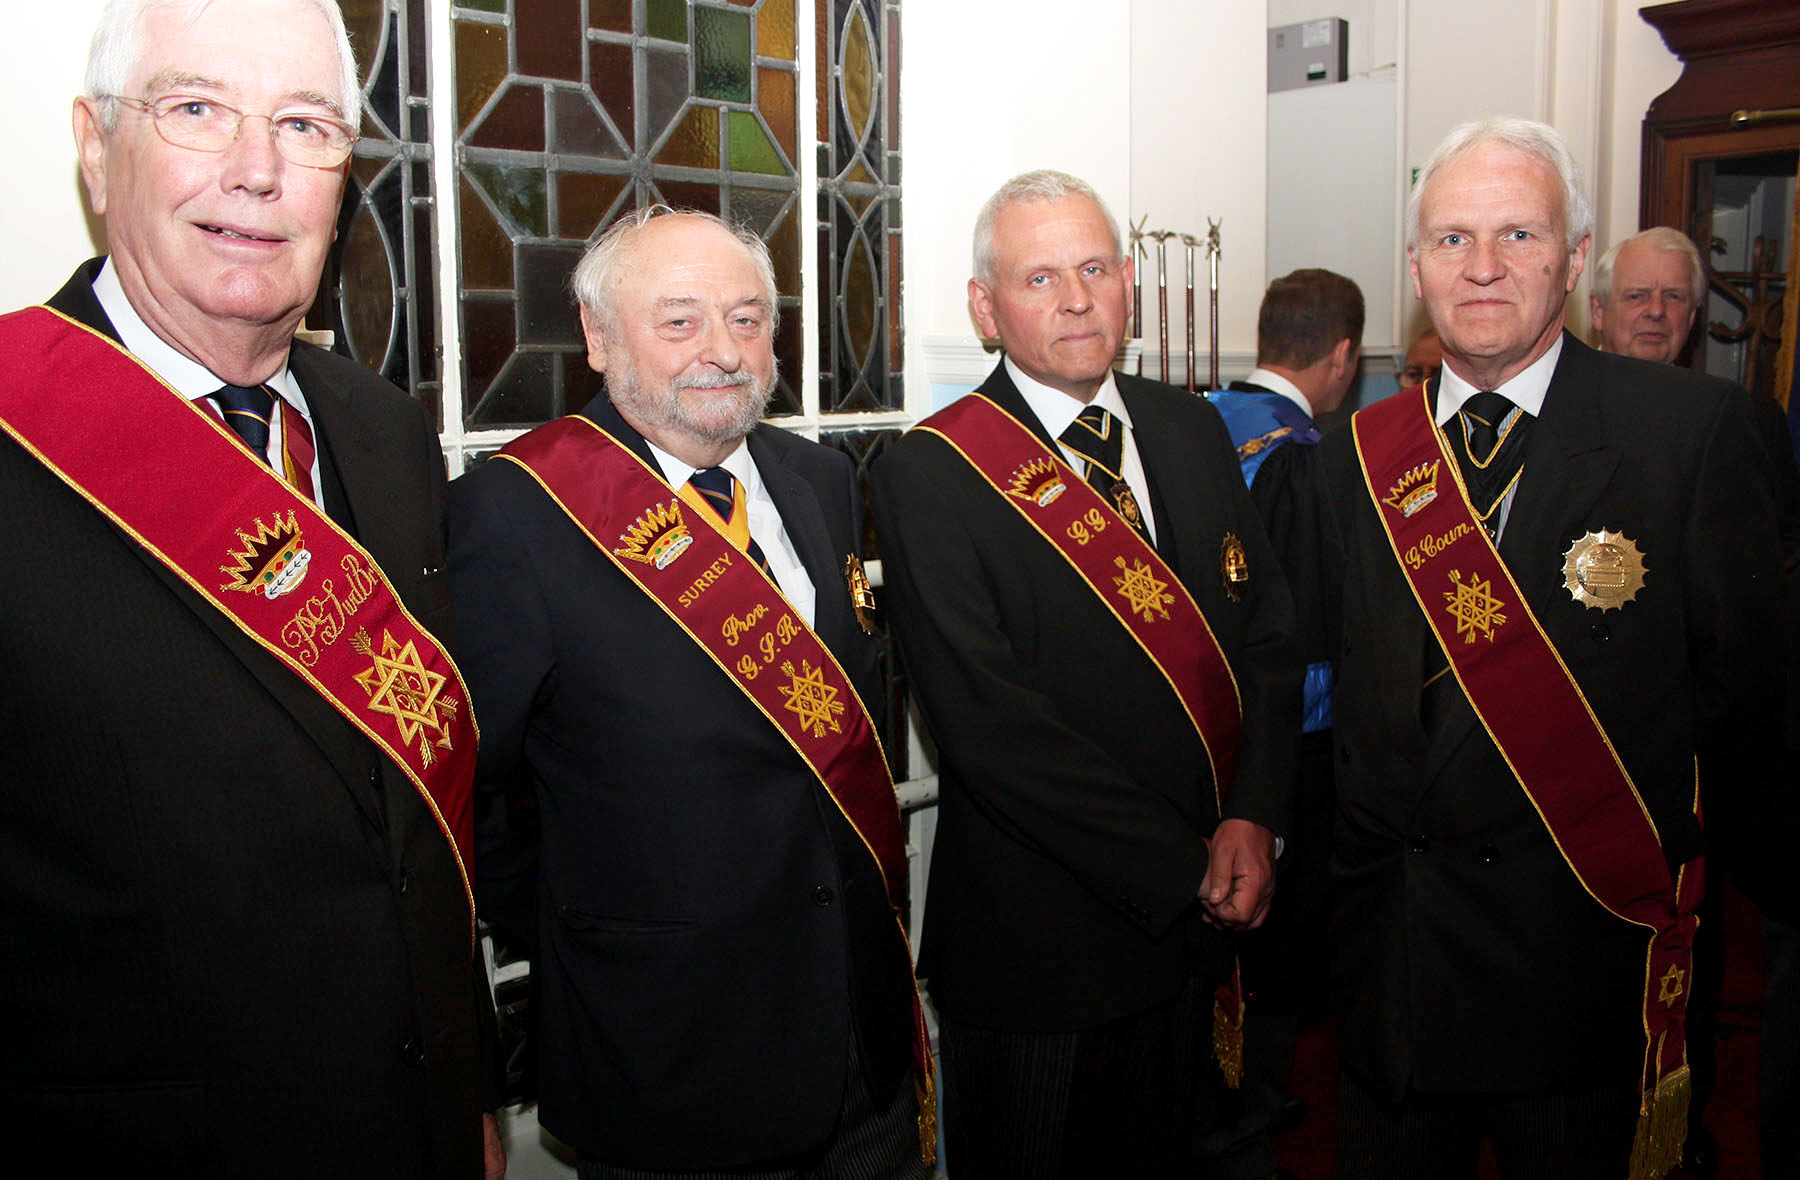 The 2017 Annual Meeting of the Provincial Grand Conclave of Surrey